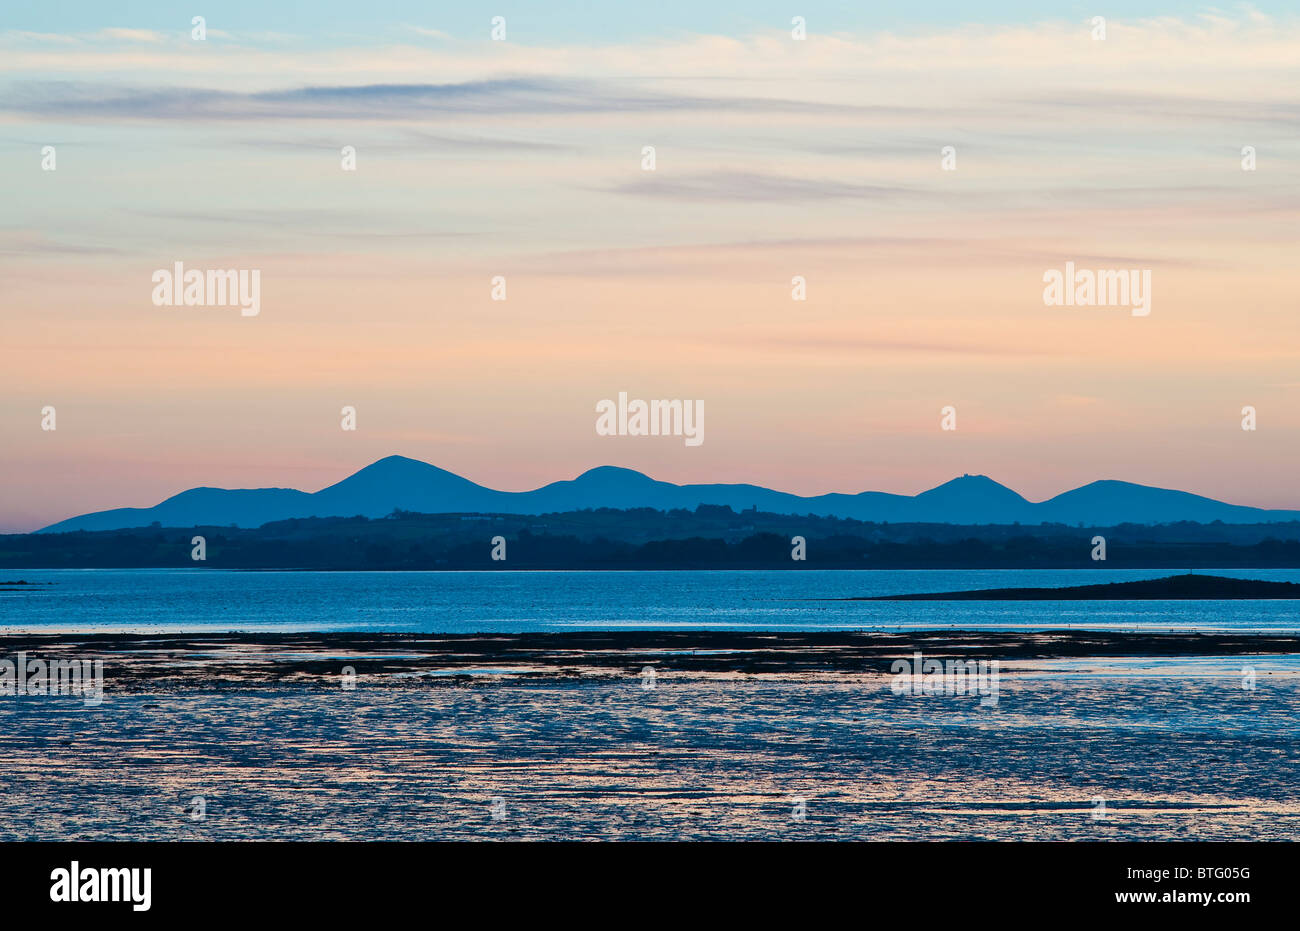 The Mourne Mountains at sunset, seen from Mount Stewart on the Ards Peninsula  looking across Strangford Lough, Northern Ireland Stock Photo